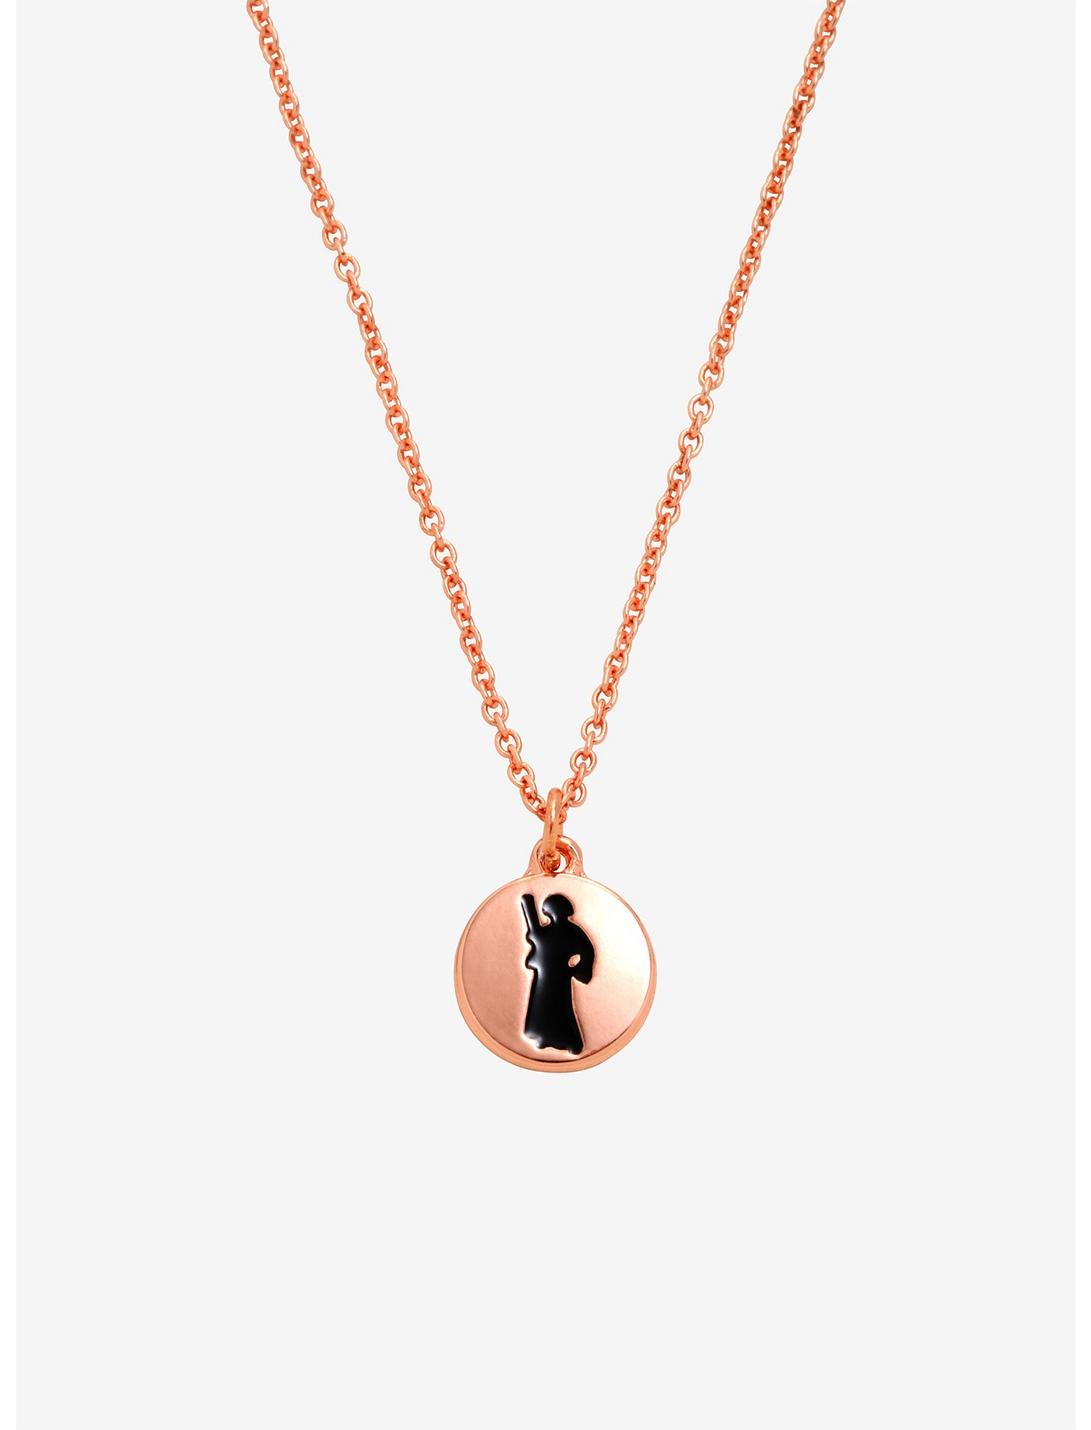 Star Wars Princess Leia Silhouette Dainty Necklace, , hi-res